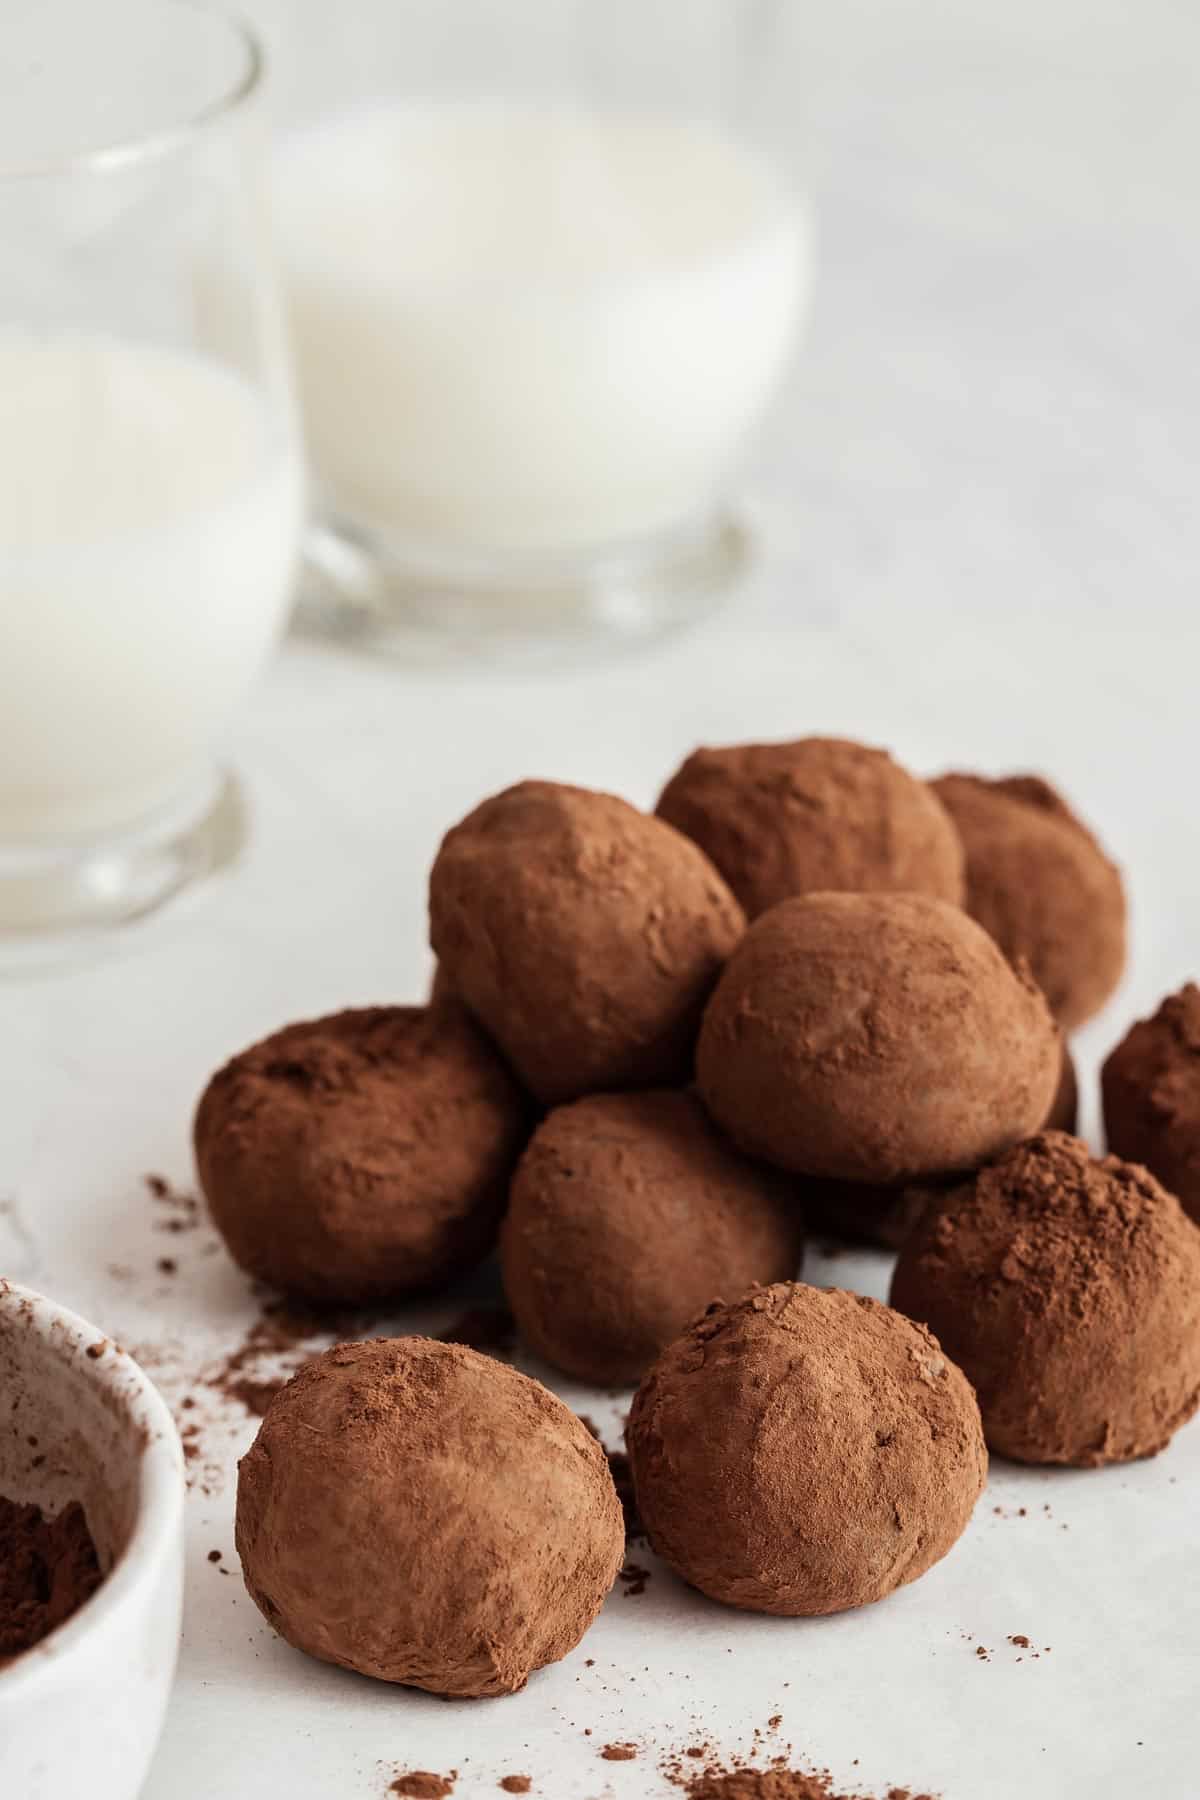 Pile of healthy chocolate truffles next to two glasses of milk.